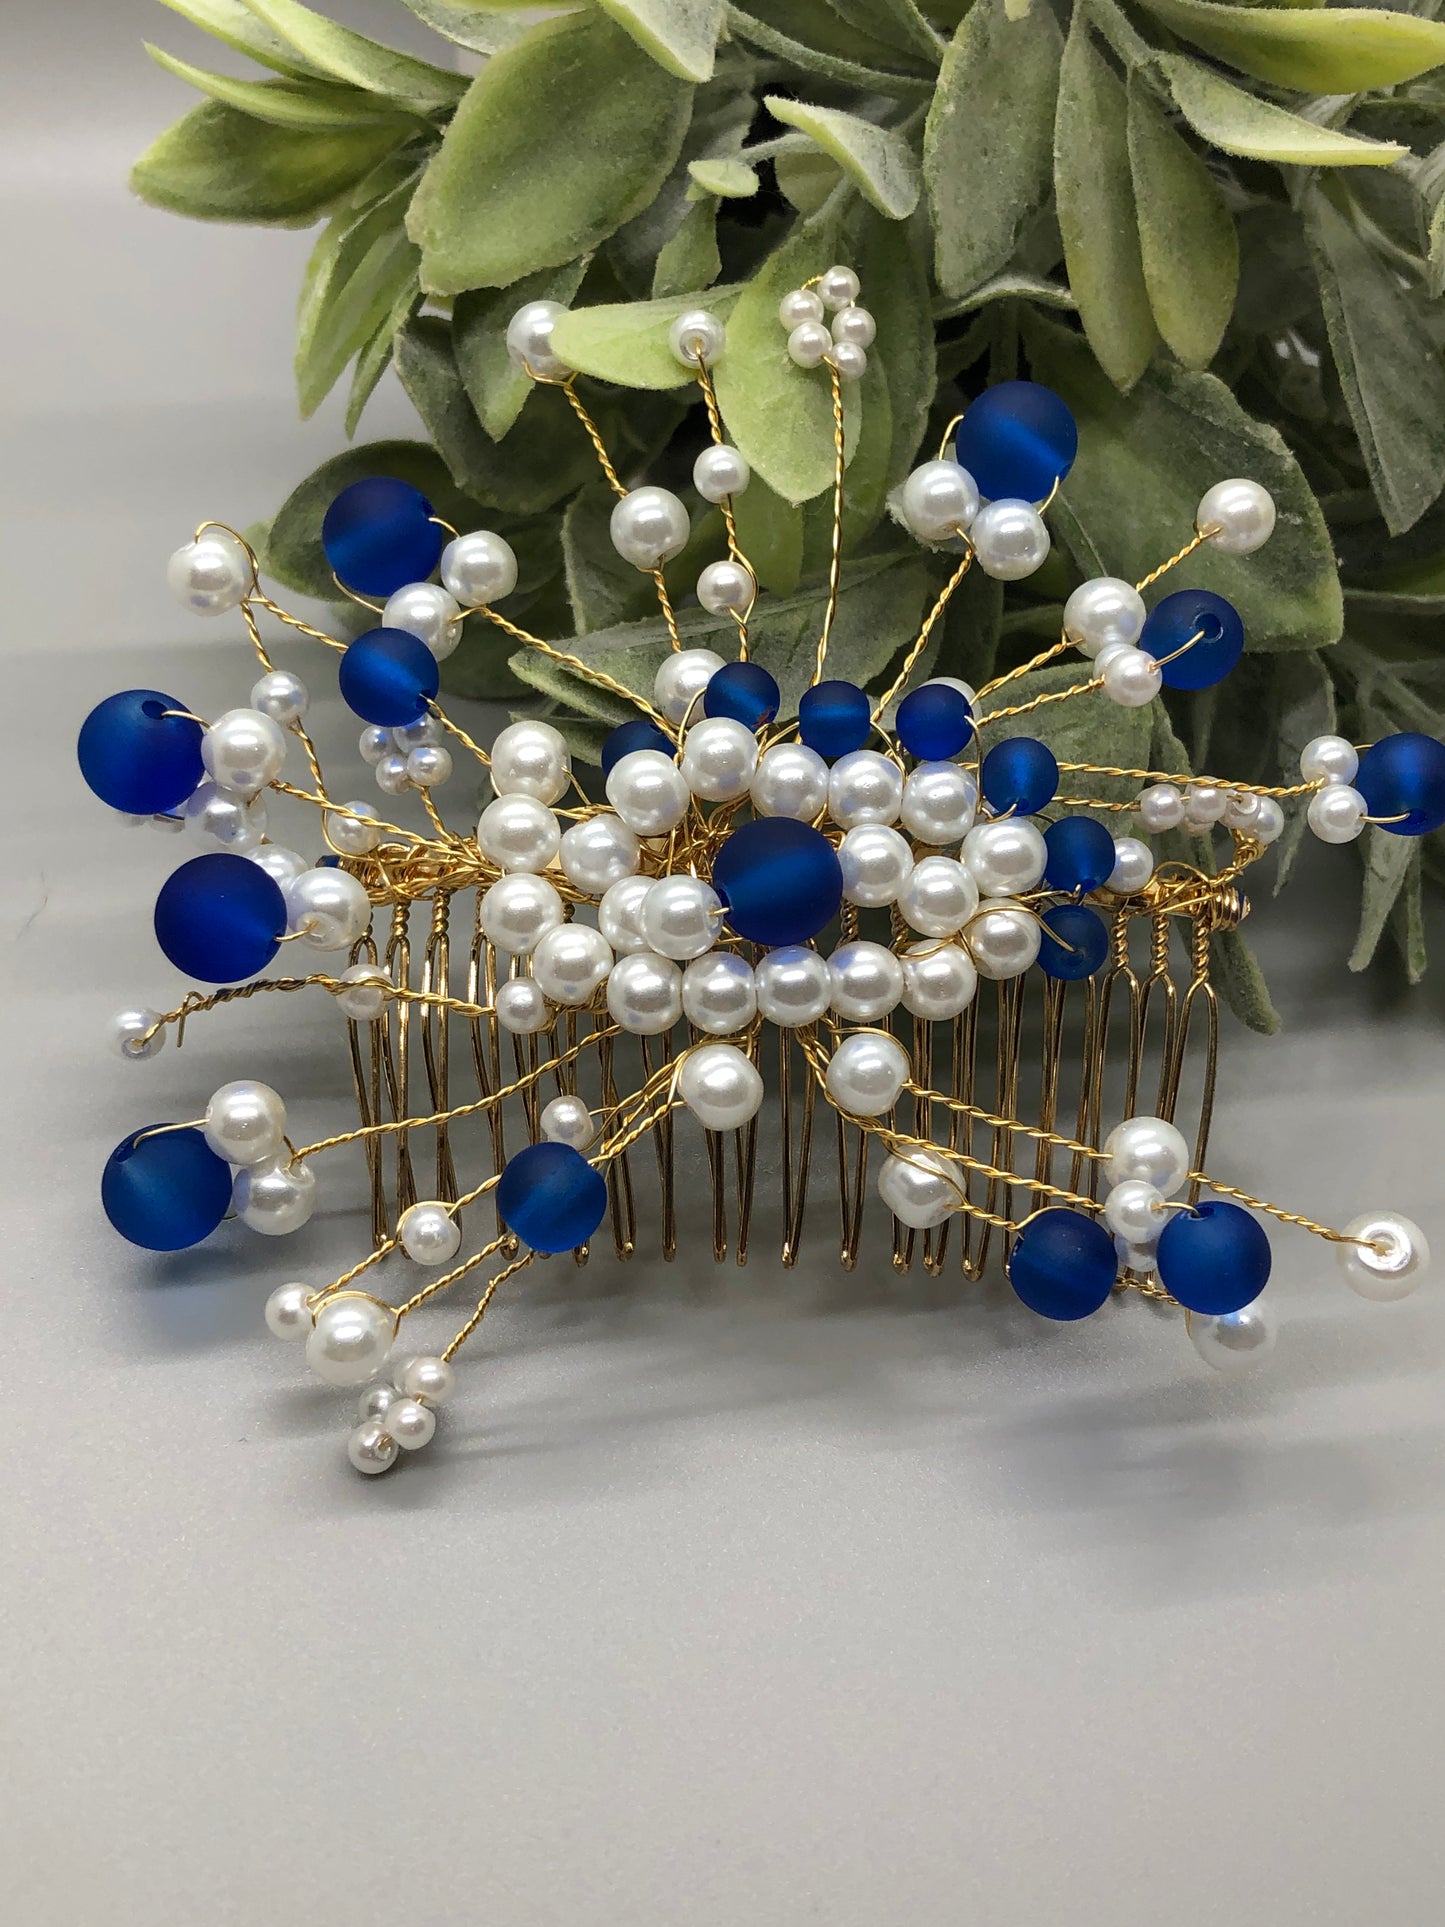 Navy Blue White Beaded  Hair Vines Comb 3.5' Gold Metal Comb Retro Bridal Prom Wedding Party